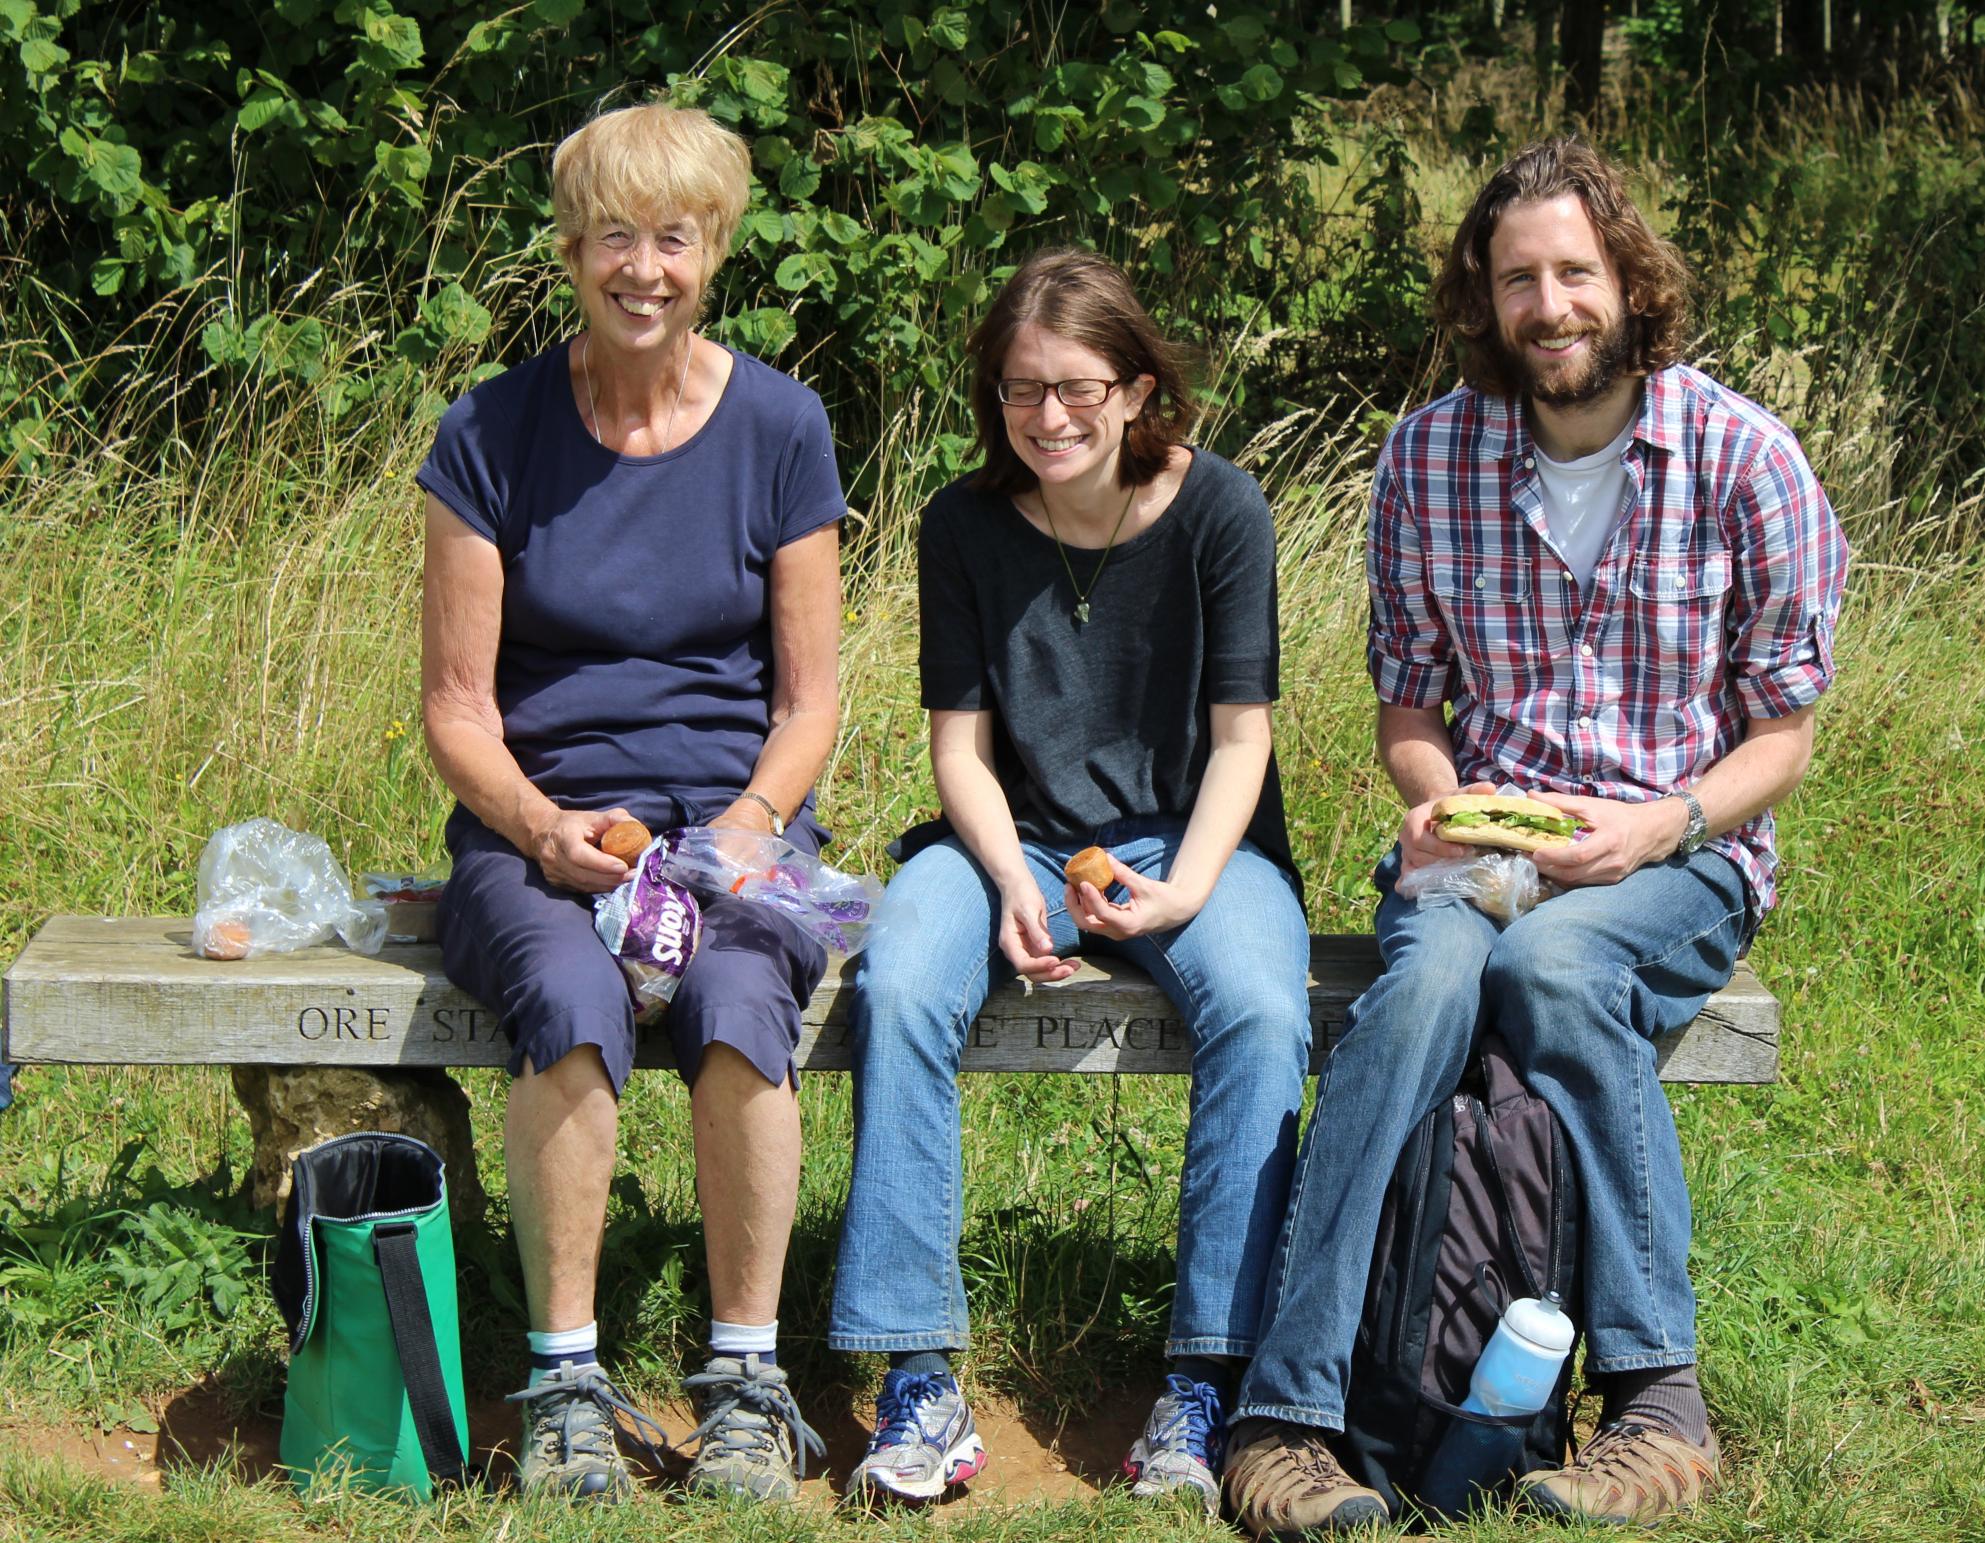 Friday 29th July, picnic lunch at the Rollright Stones, Gloucestershire.